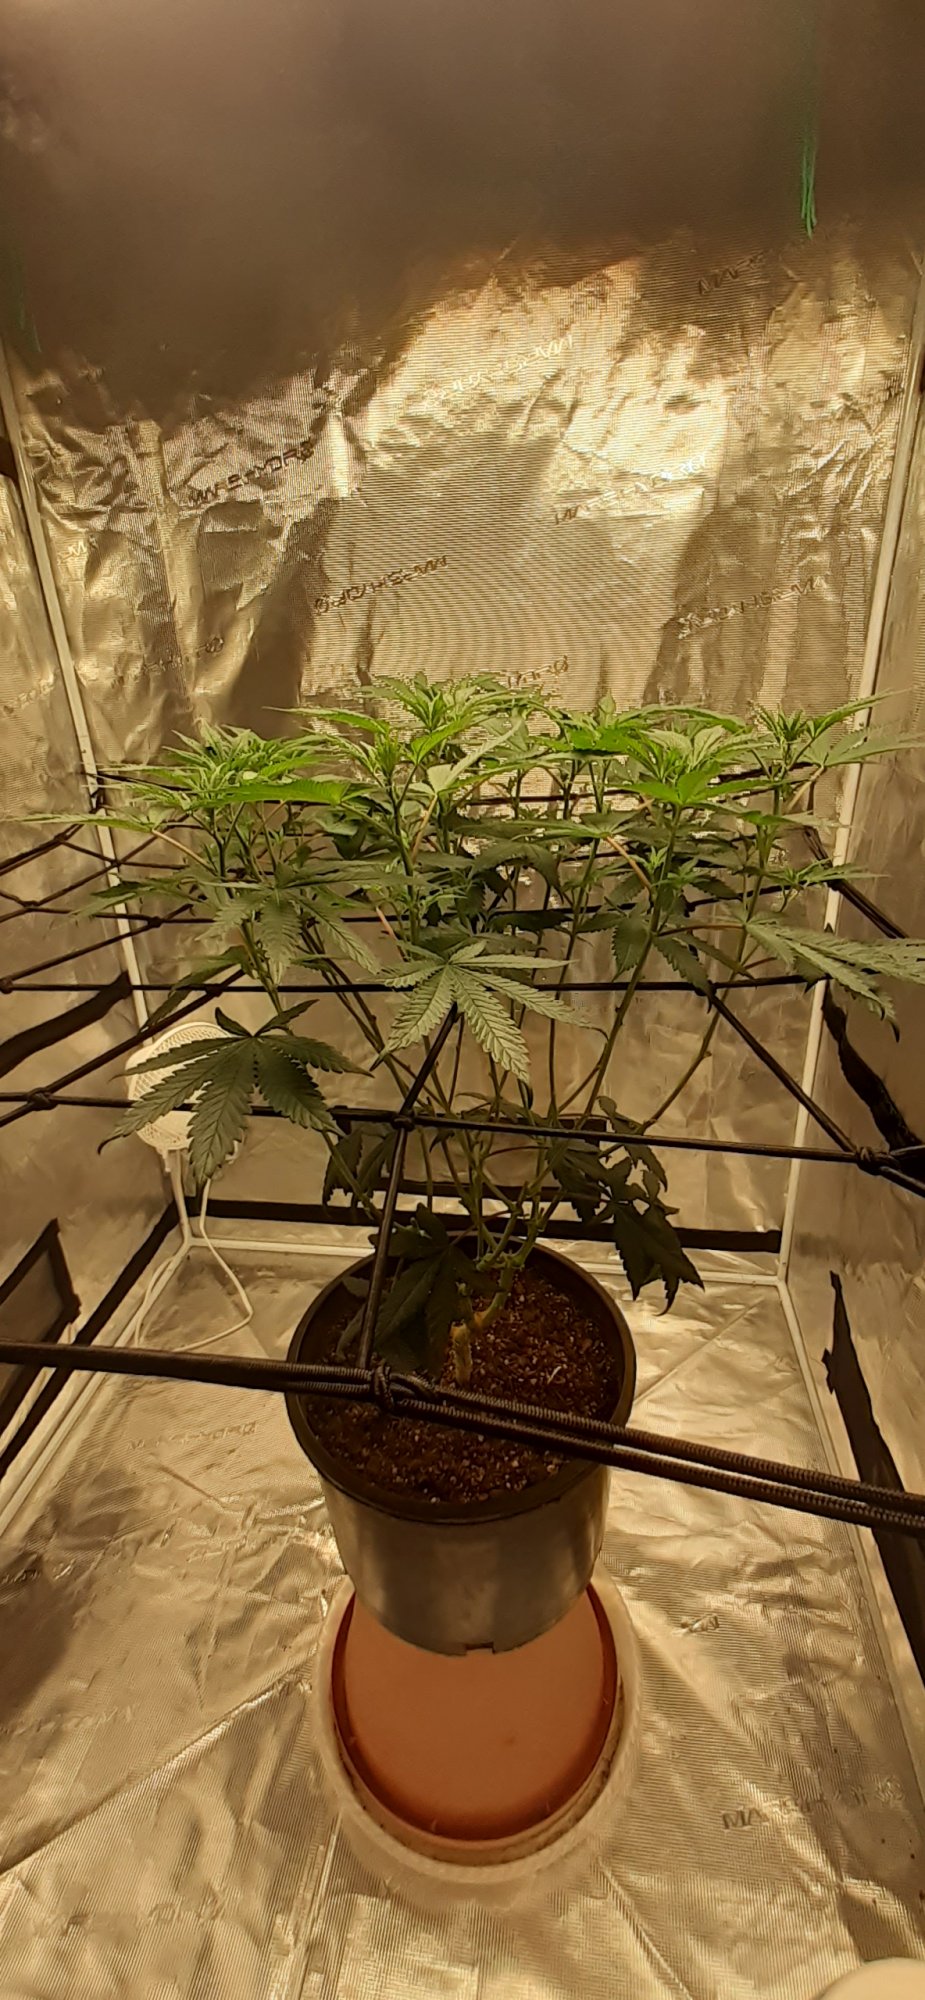 Can you trim in flower 3